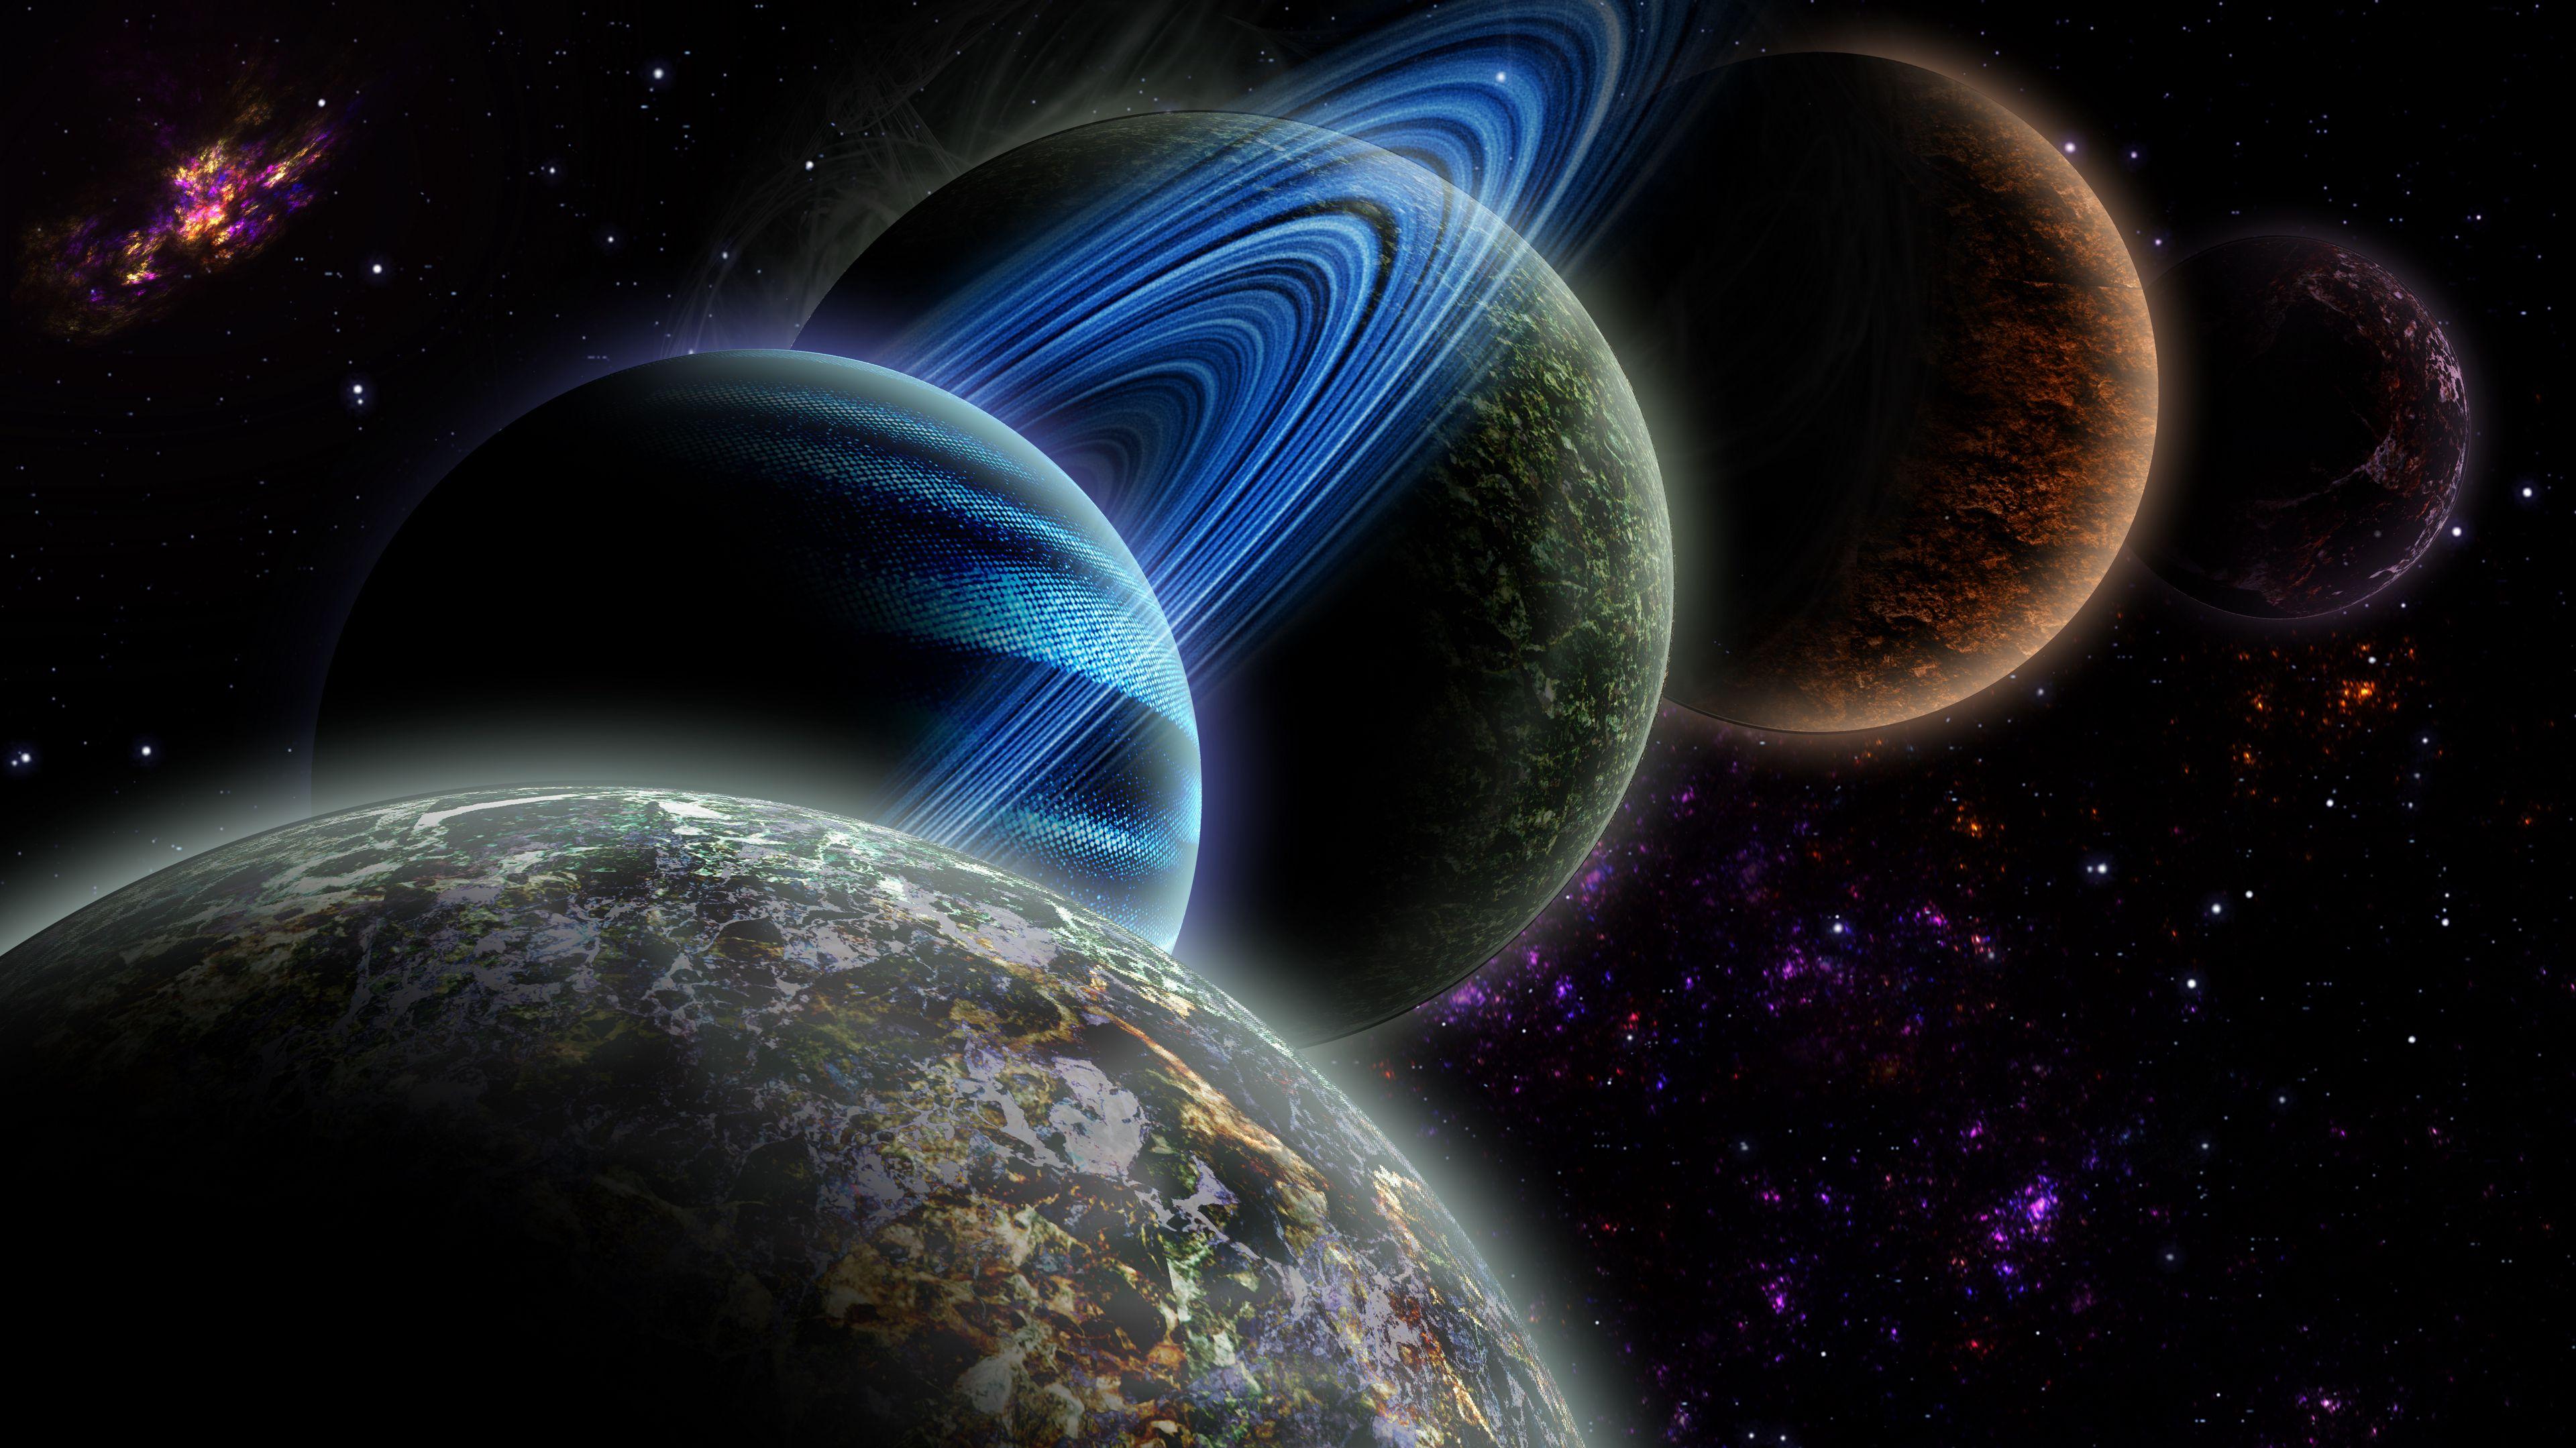 Download wallpaper 3840x2160 planets galaxy stars space